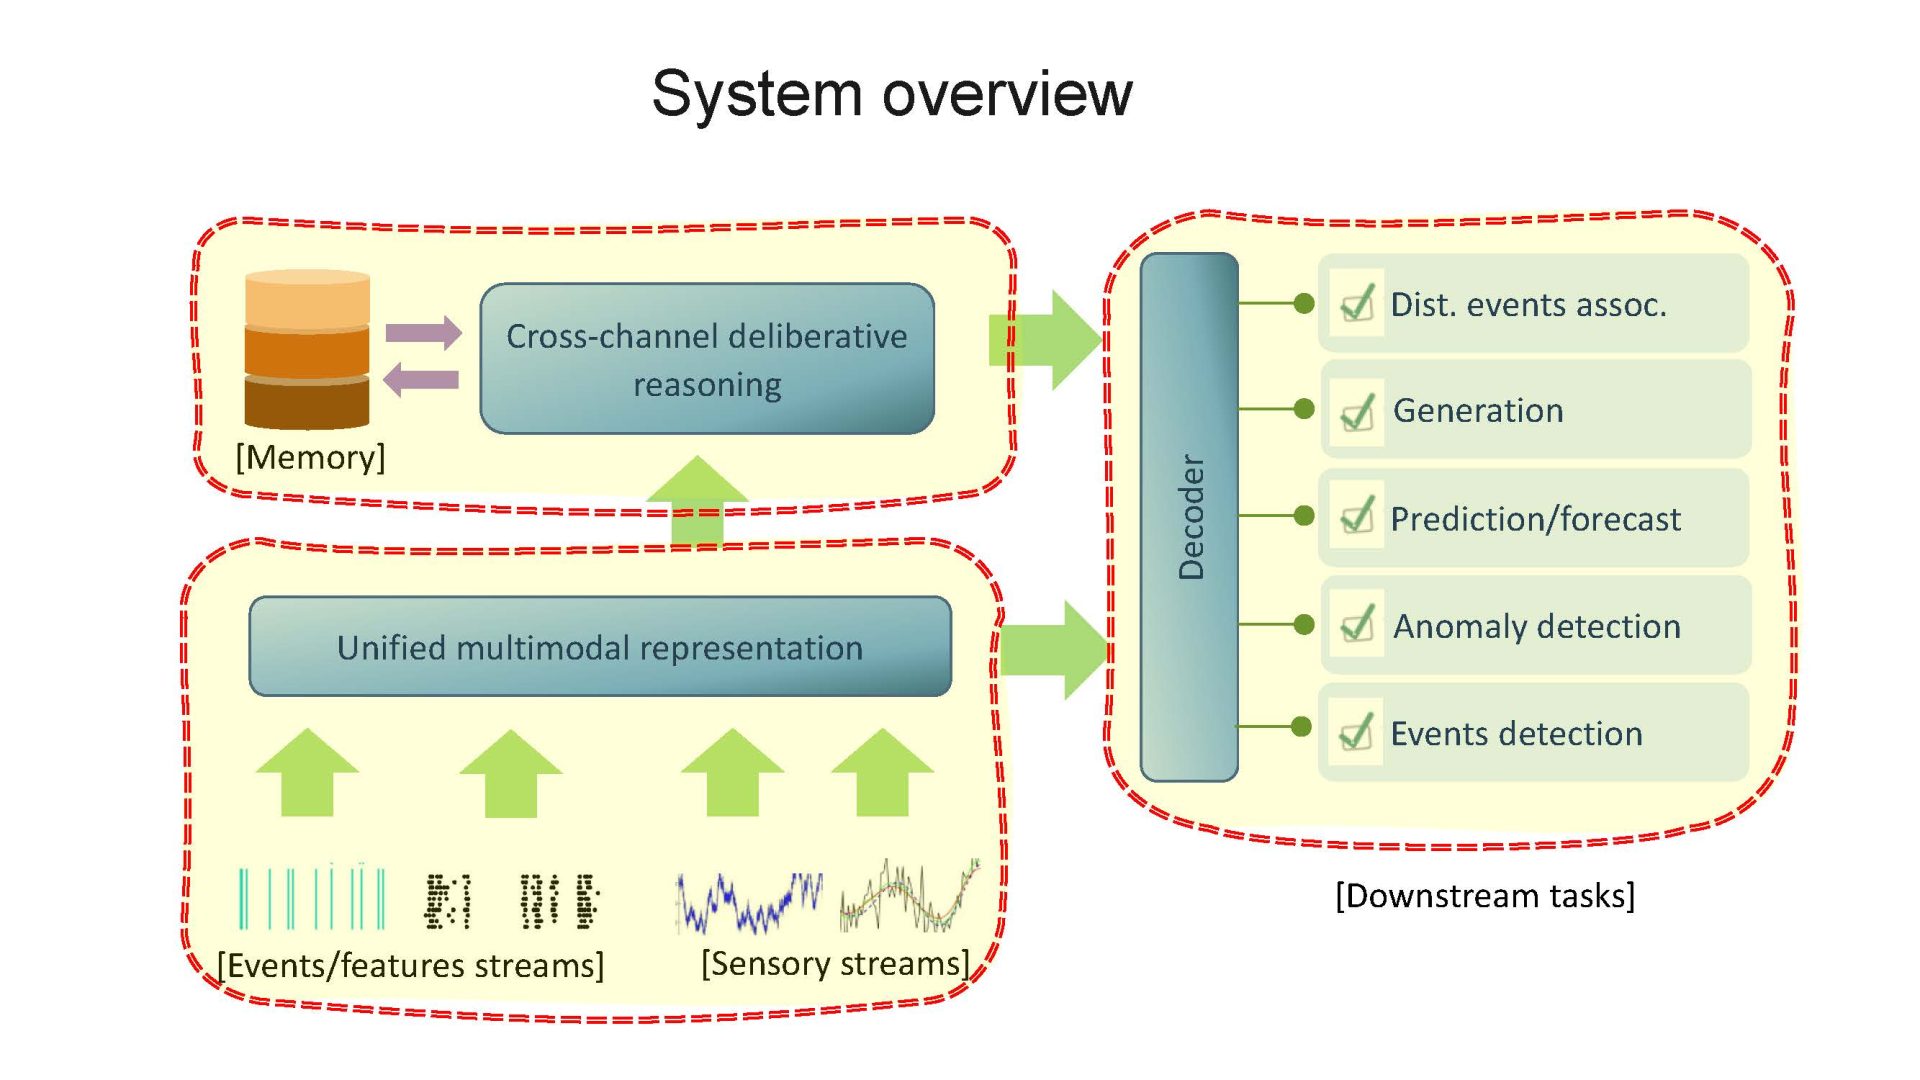 System overview: Unified multimodal representation feeds into Memory and Cross-channel deliberative reasoning and Downstream tasks. Memory and Cross-channel deliberative decision making also feeds into Downstream tasks. Downstream tasks are a Decoder of Dist. events assoc; Generation; Prediction/forecast; Anomaly detection; Events detection.